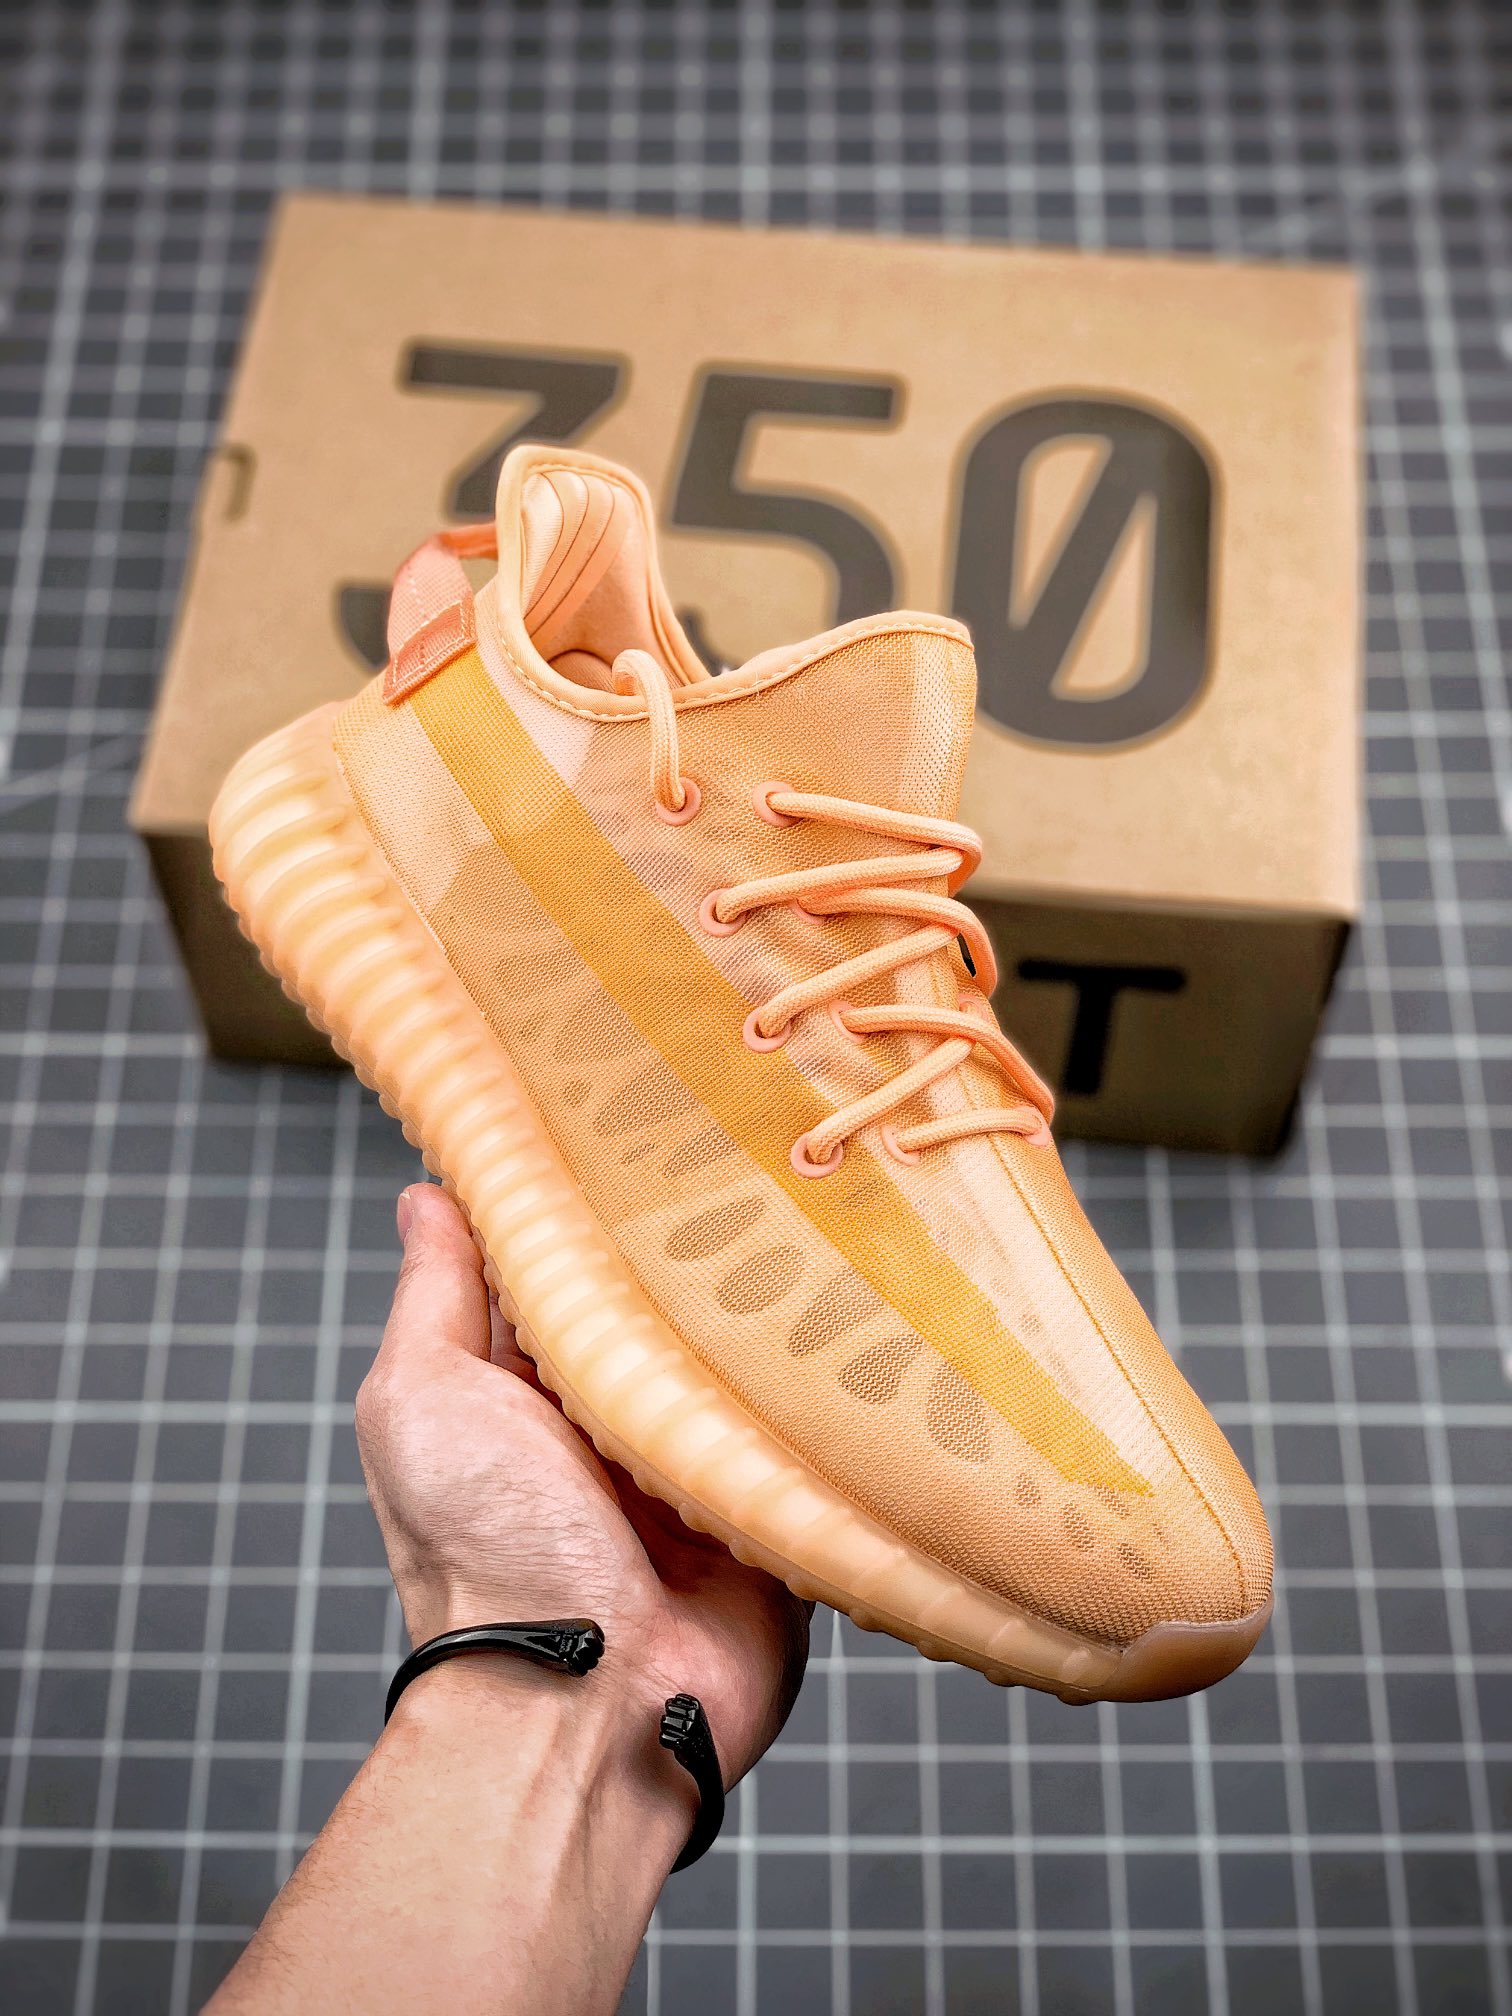 adidas Yeezy Boost 350 V2 Mono Clay For Sale â Sneaker Hello